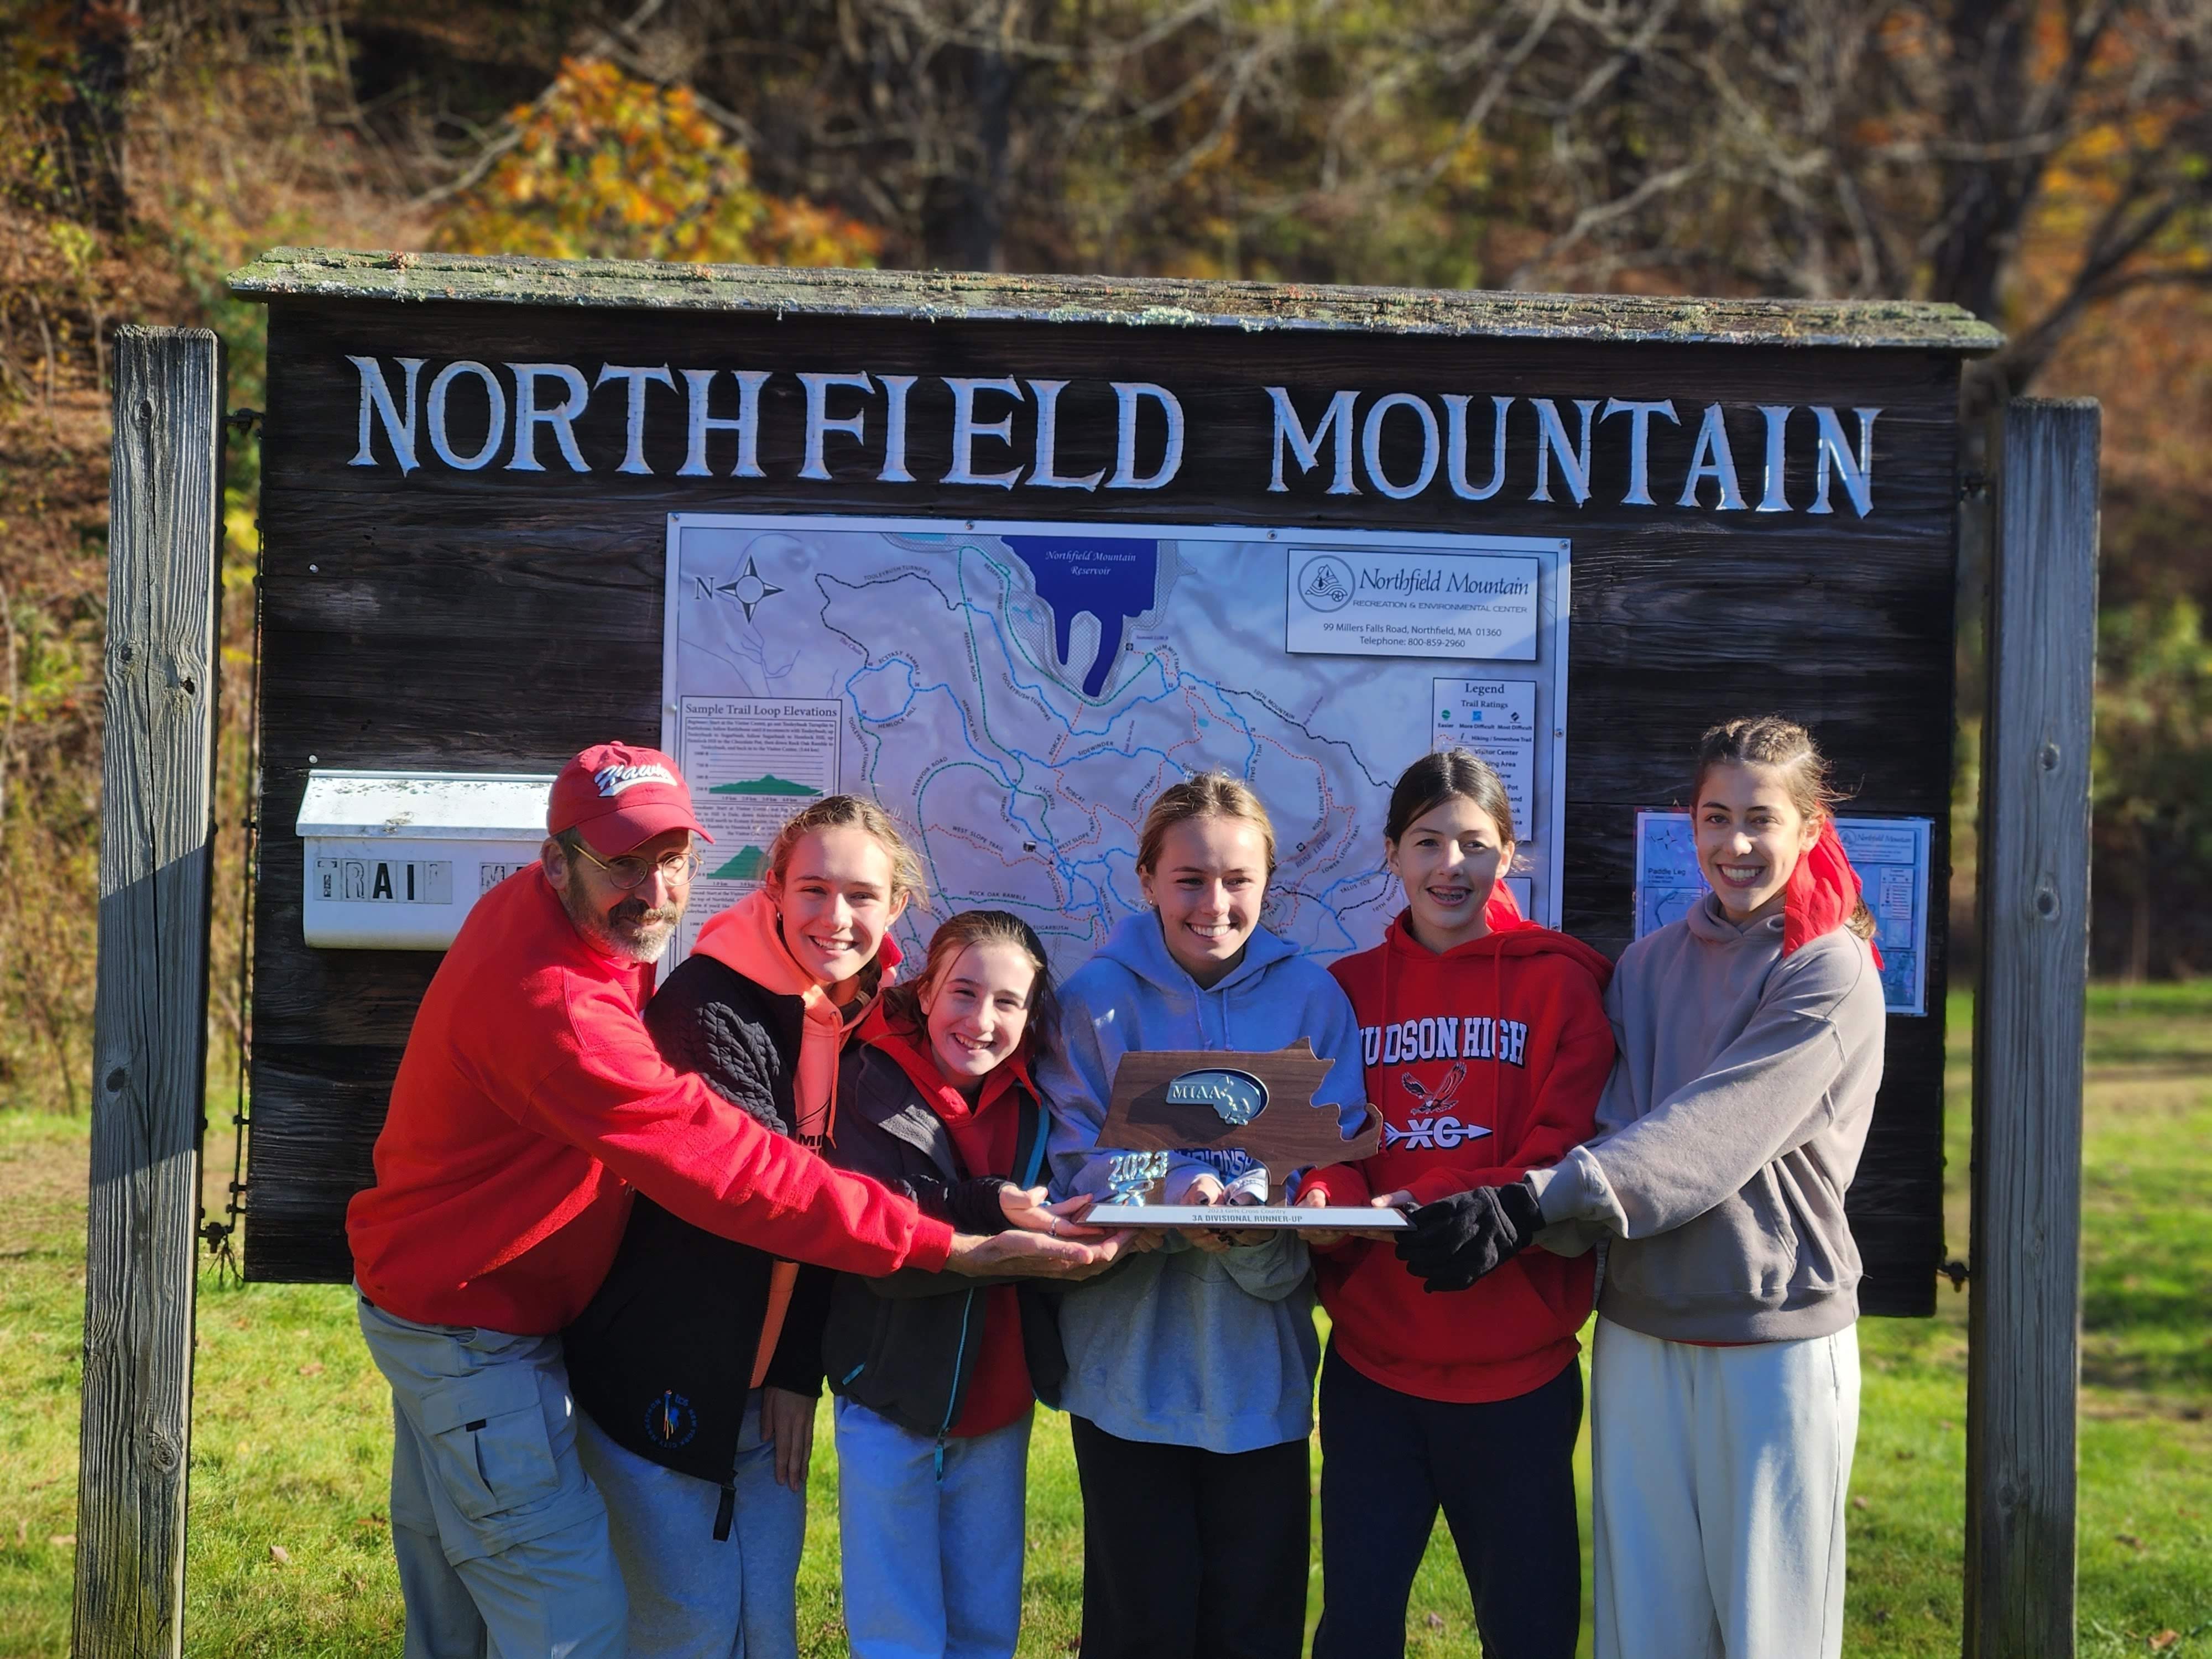 Hudson cross country succeeds at state tournament